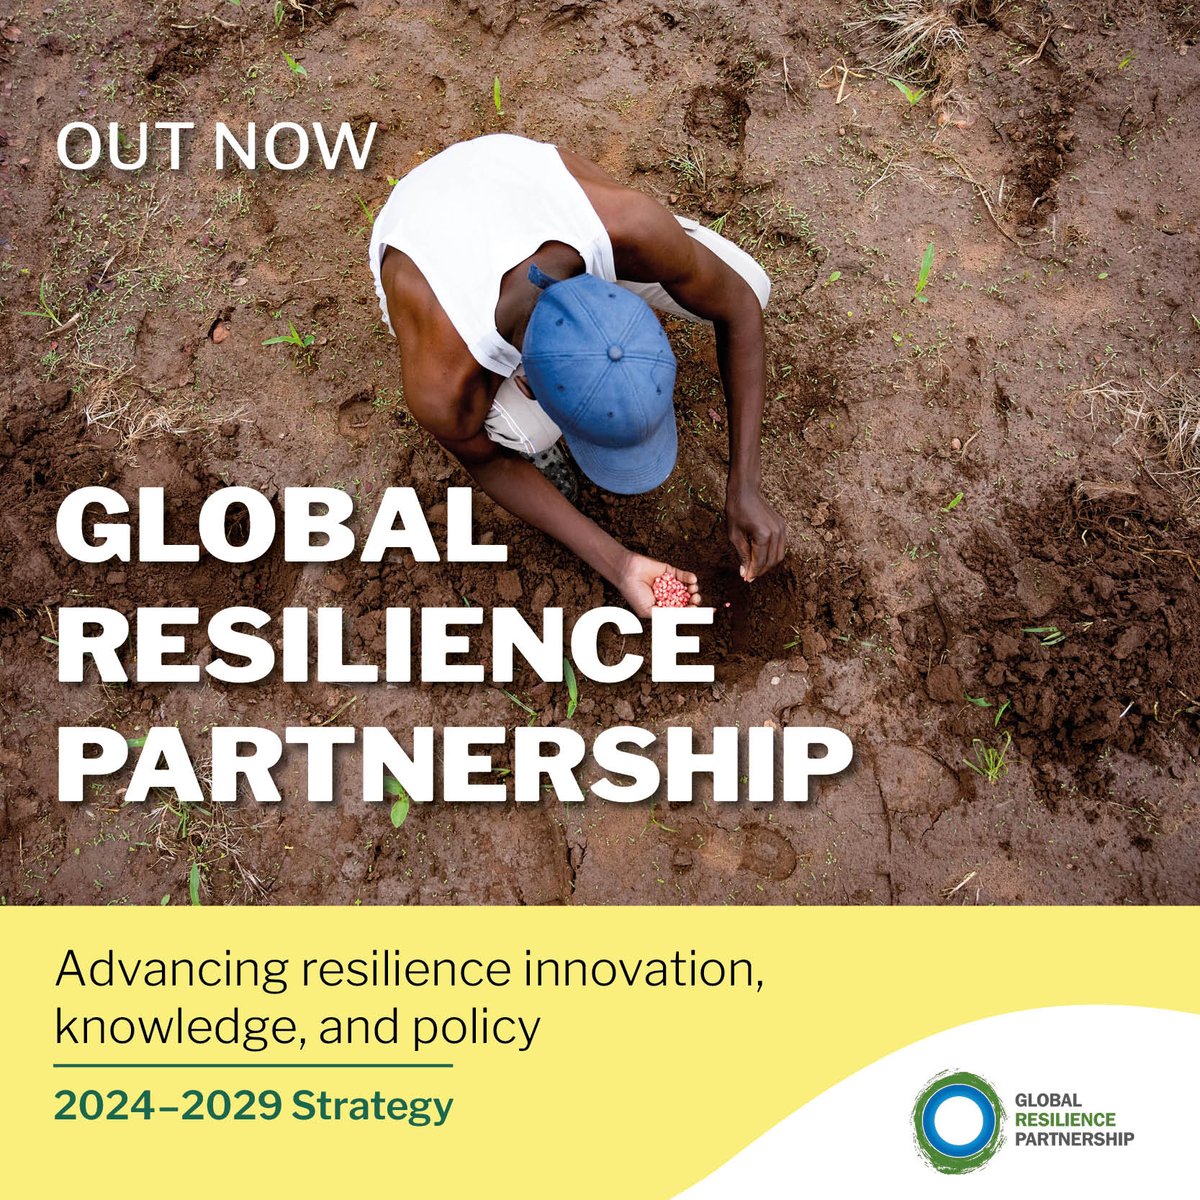 🌱 Curious about the pillars driving climate resilience? Our new 2024-2029 strategy focuses on food, finance, and communities. If you're passionate about resilience, this is something you'll want to get in the know about! Learn more: bit.ly/3yrwDQY